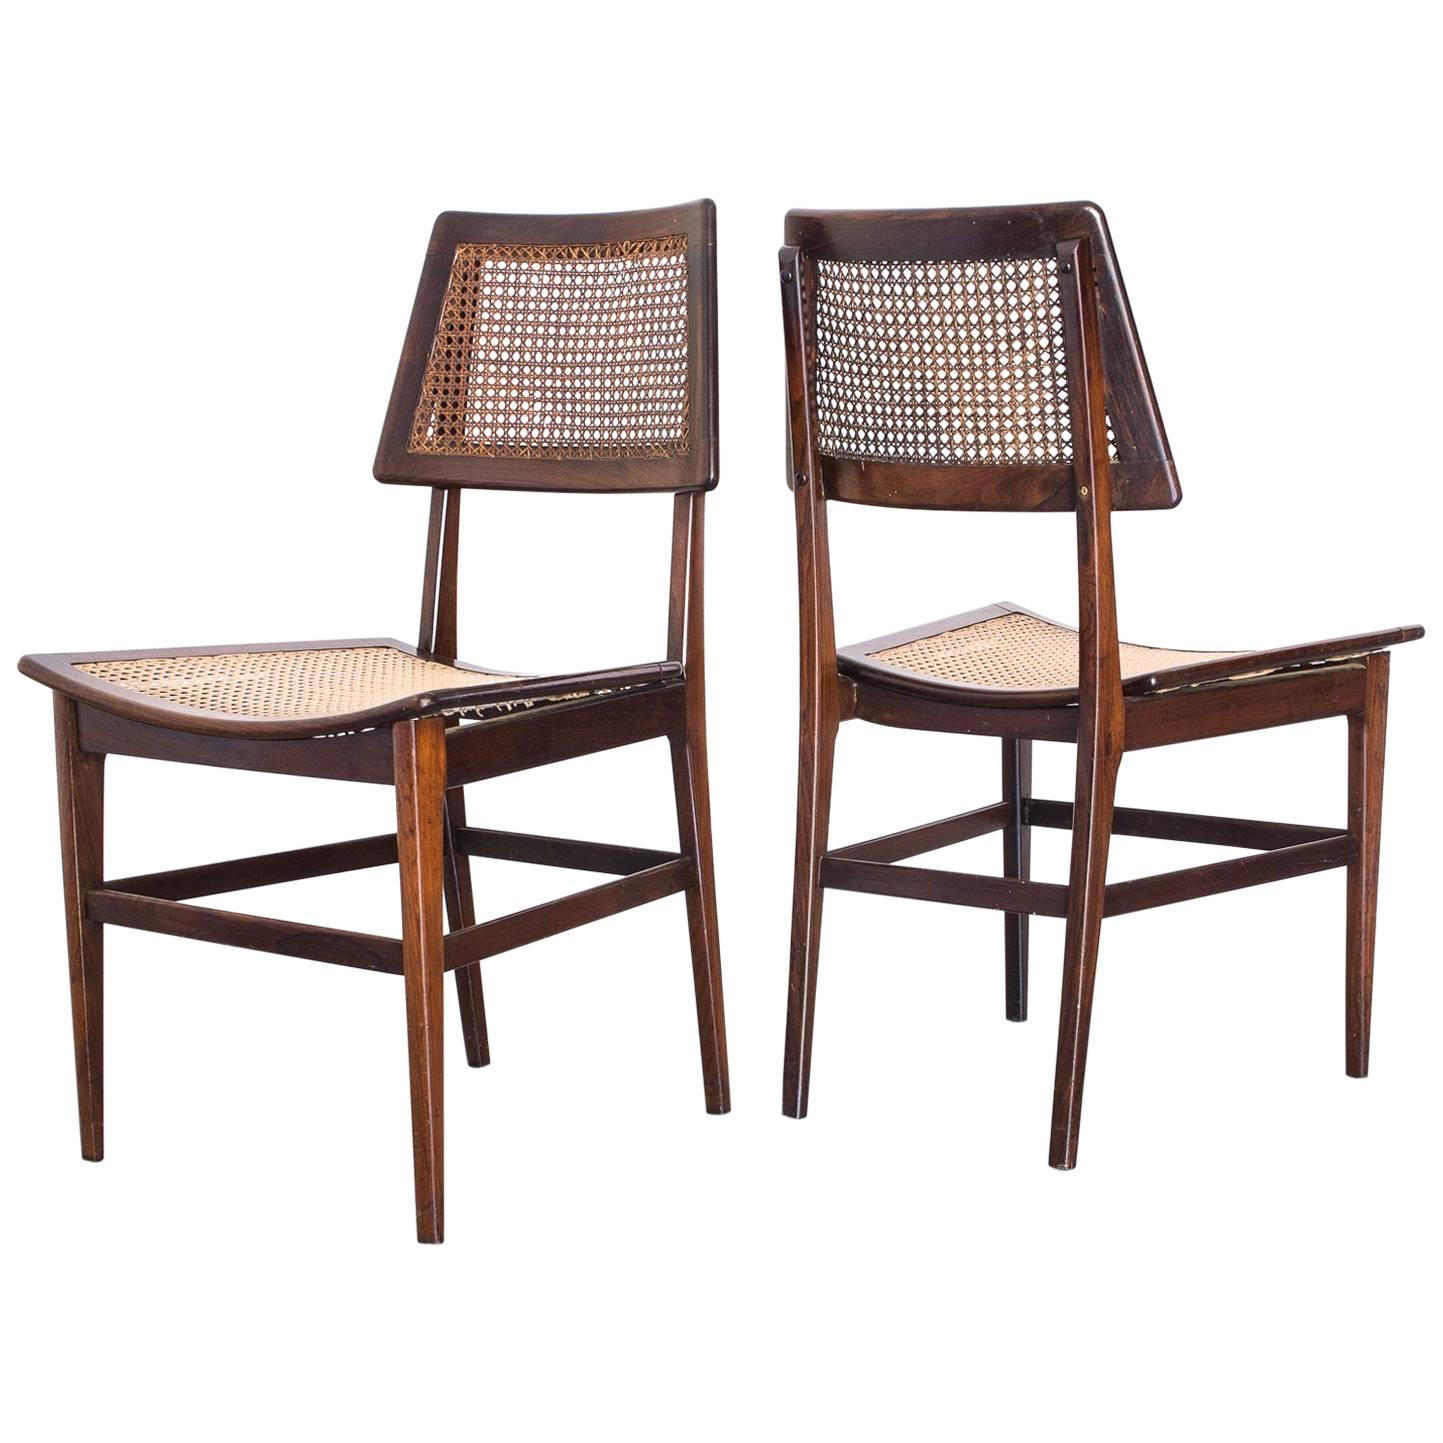 1960s Pair of "Curved Seat" Chairs in Rosewood by Joaquim Tenreiro, Brazil